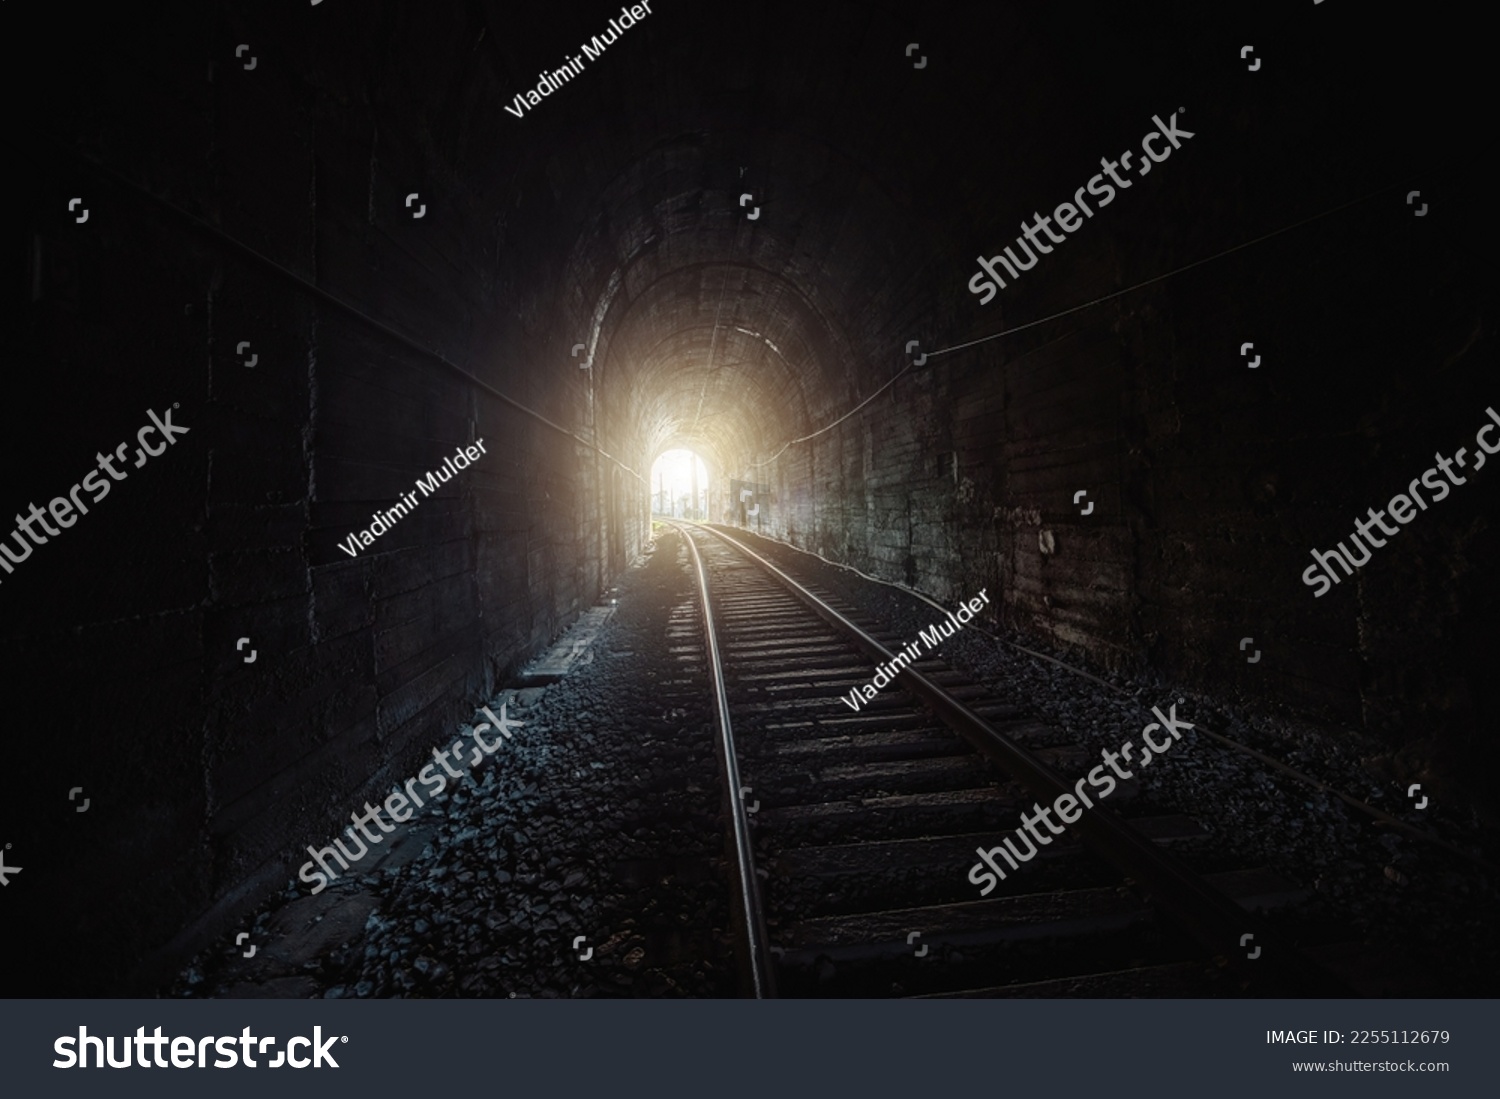 Light at the end of railroad tunnel. #2255112679